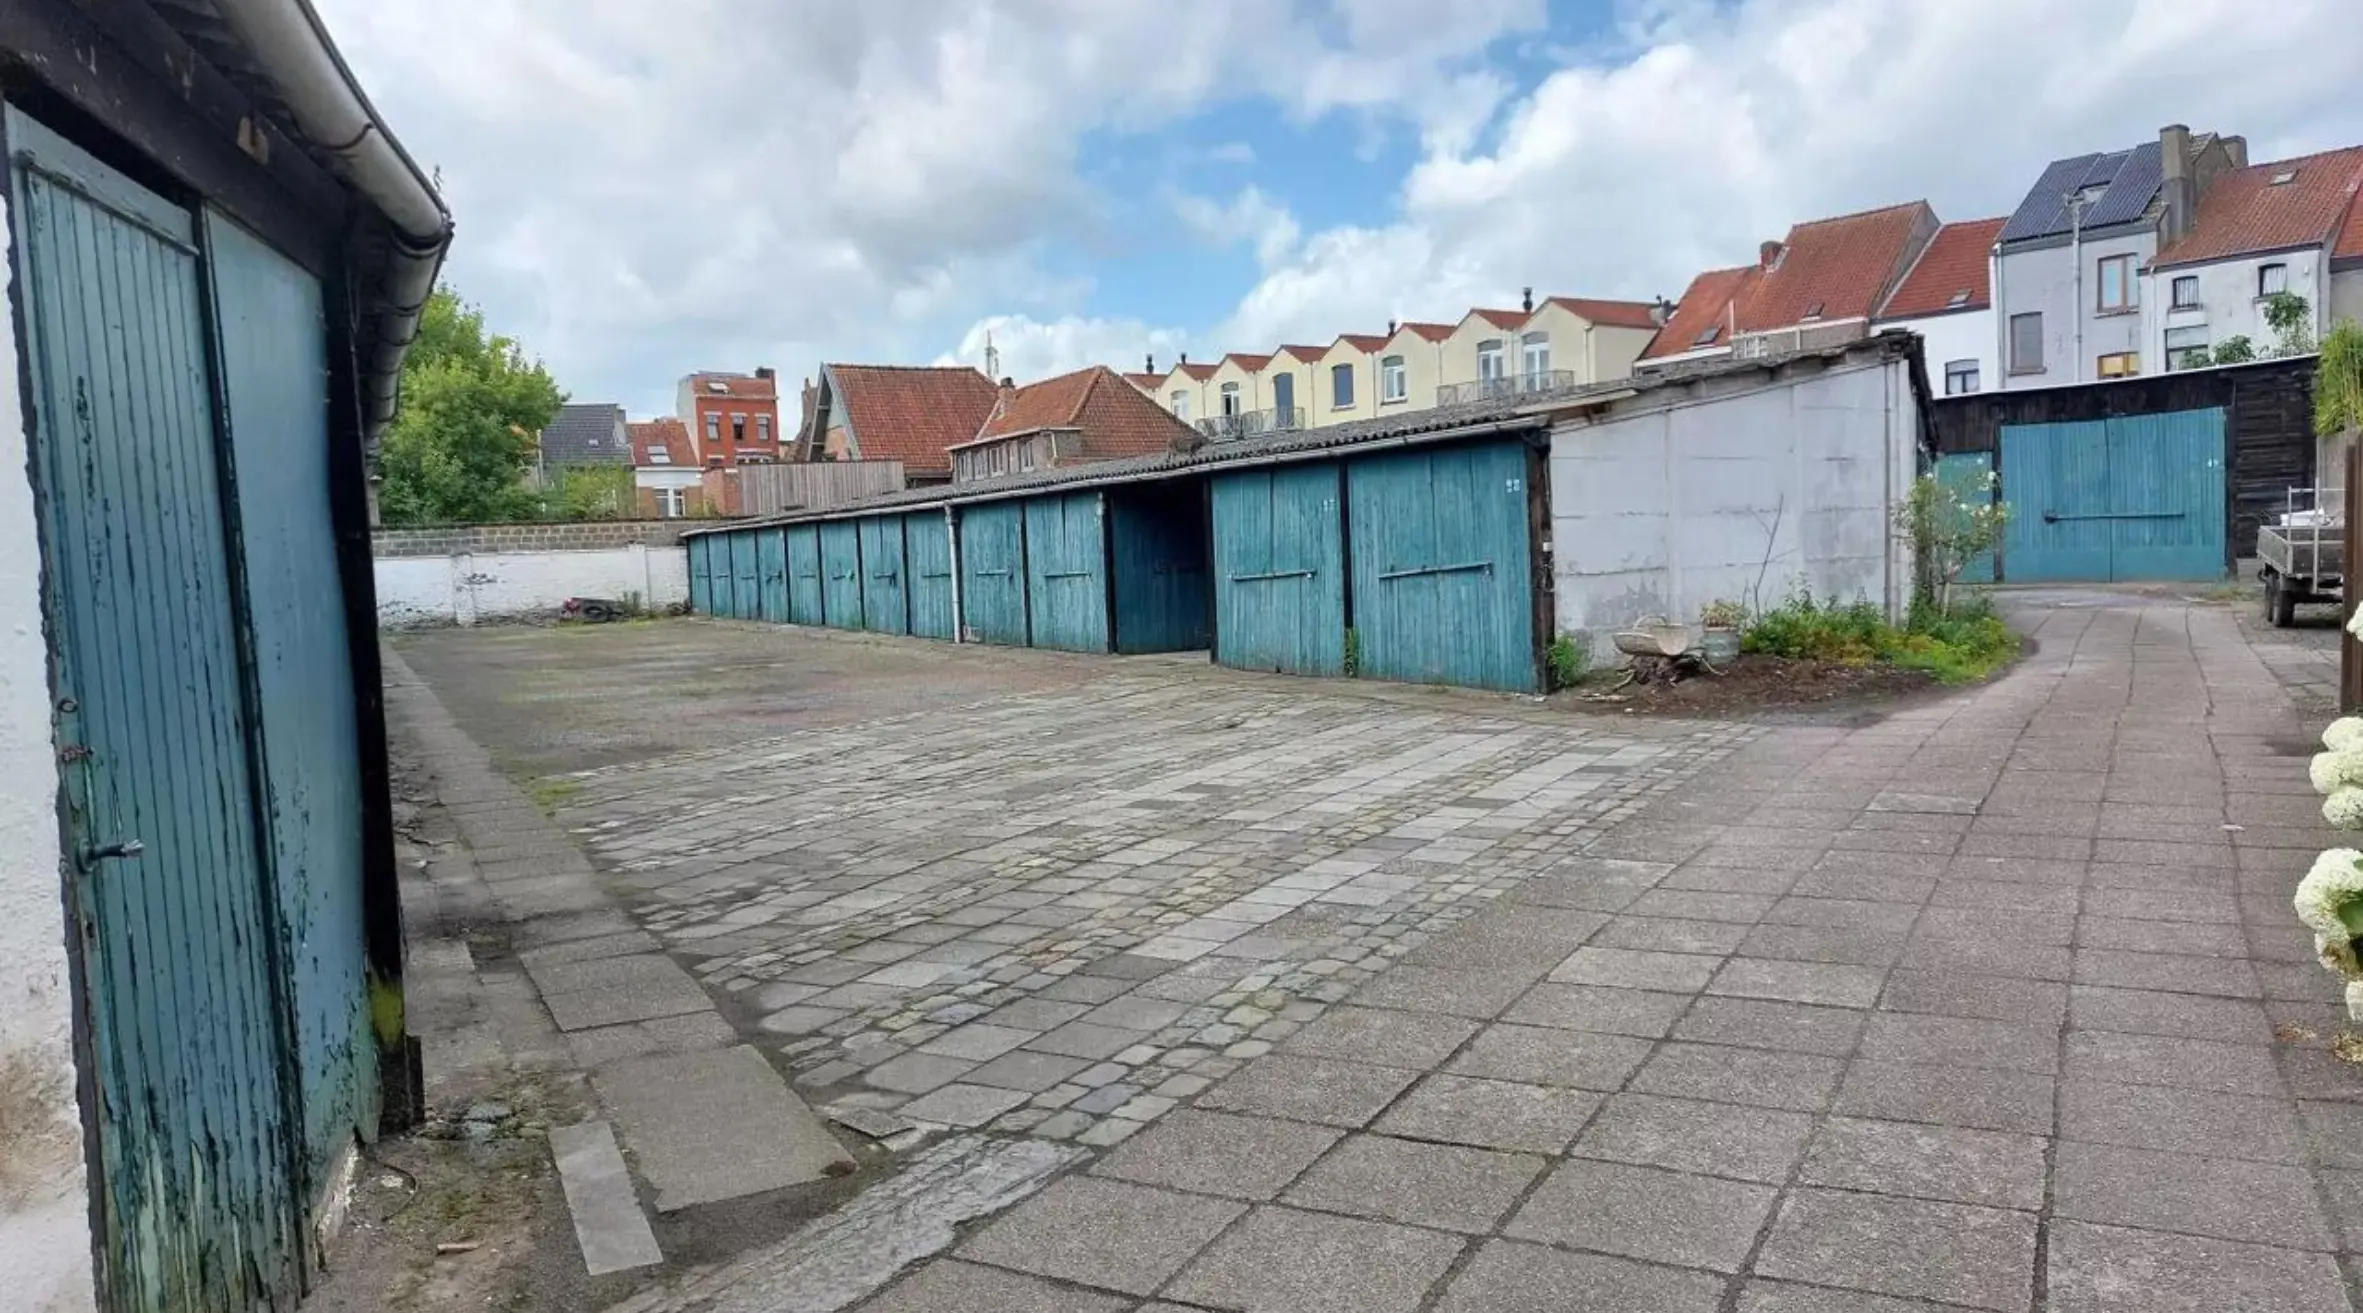 Inefficient Garage Boxes in Ghent Opportunities for Sustainable Urban Redevelopment